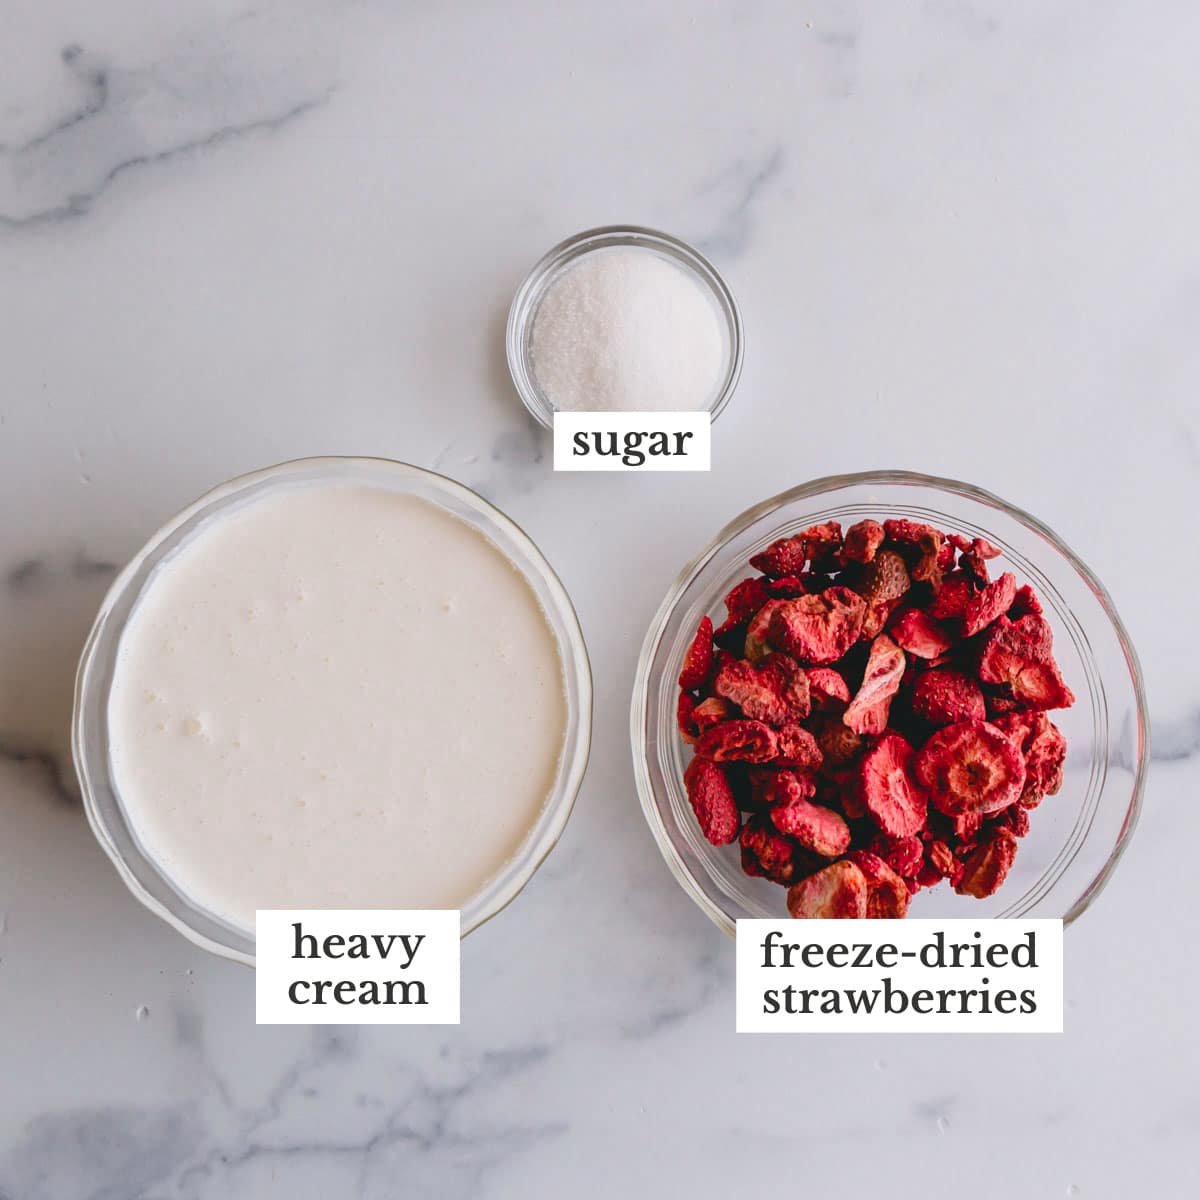 Overhead image of a bowl of heavy cream, a small bowl of sugar, and a bowl of freeze-dried strawberries.